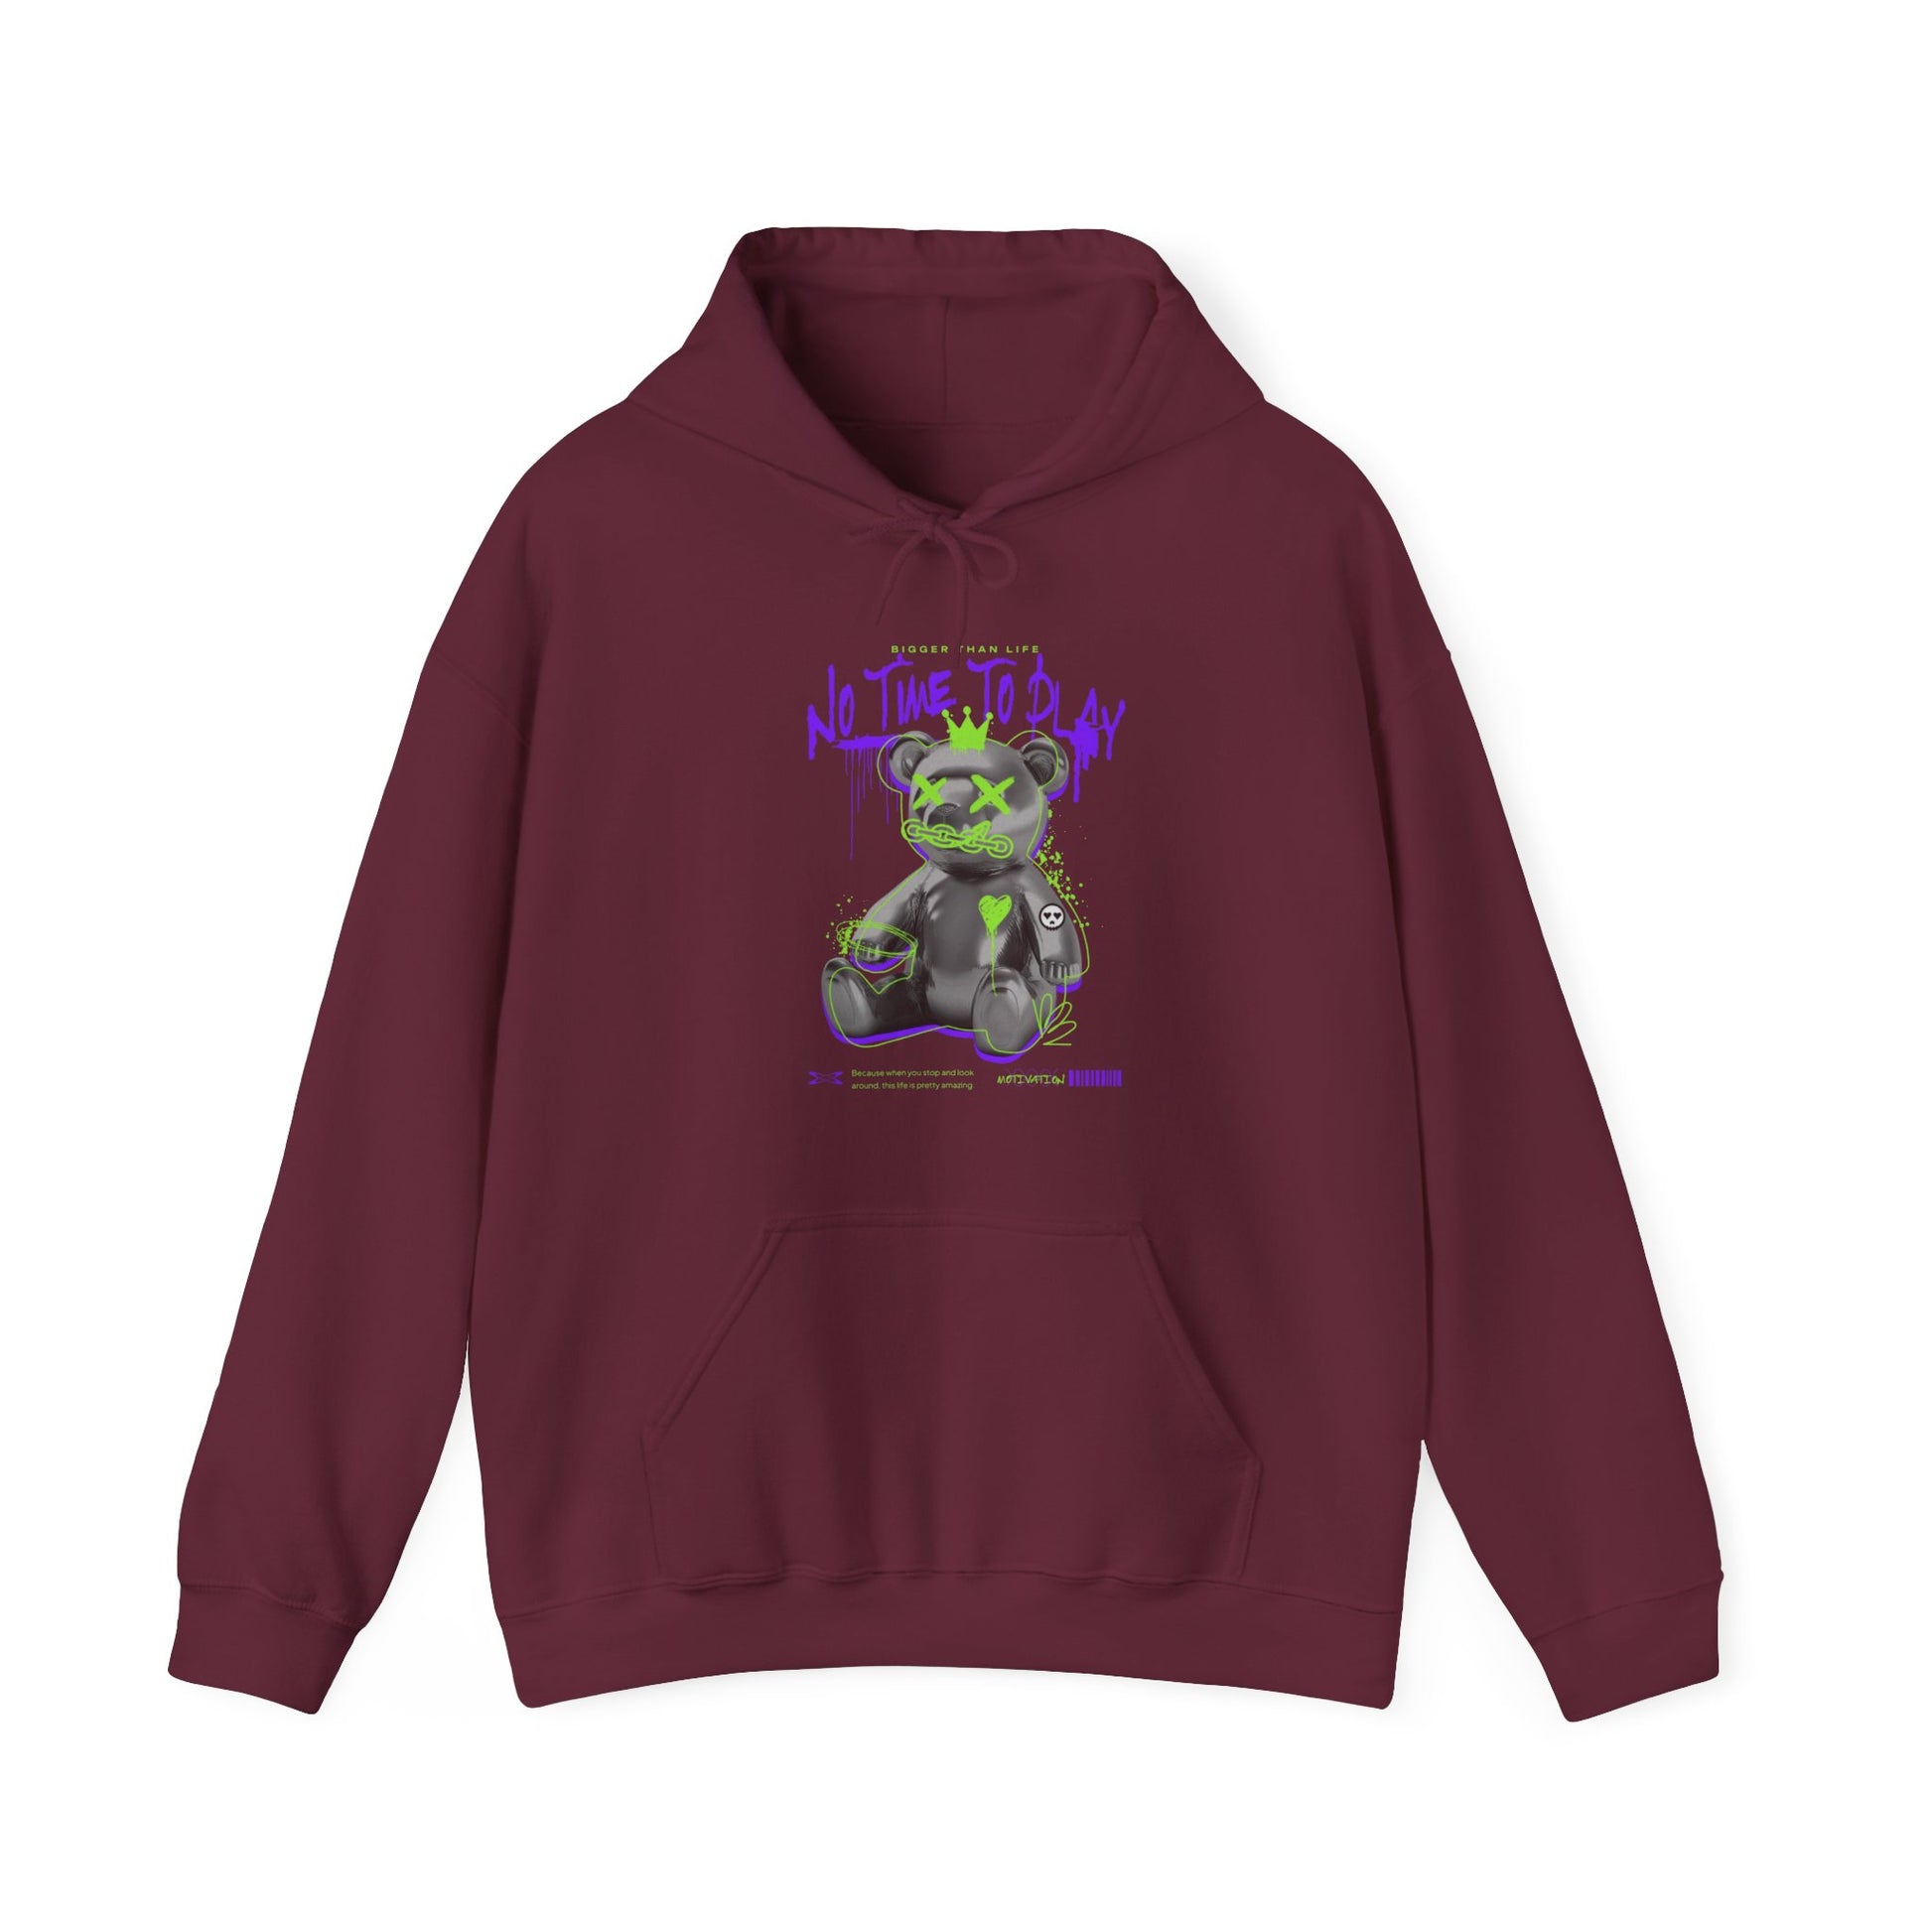 Unisex heavy blend hoodie with a dynamic bear design, blending comfort with a powerful life message.